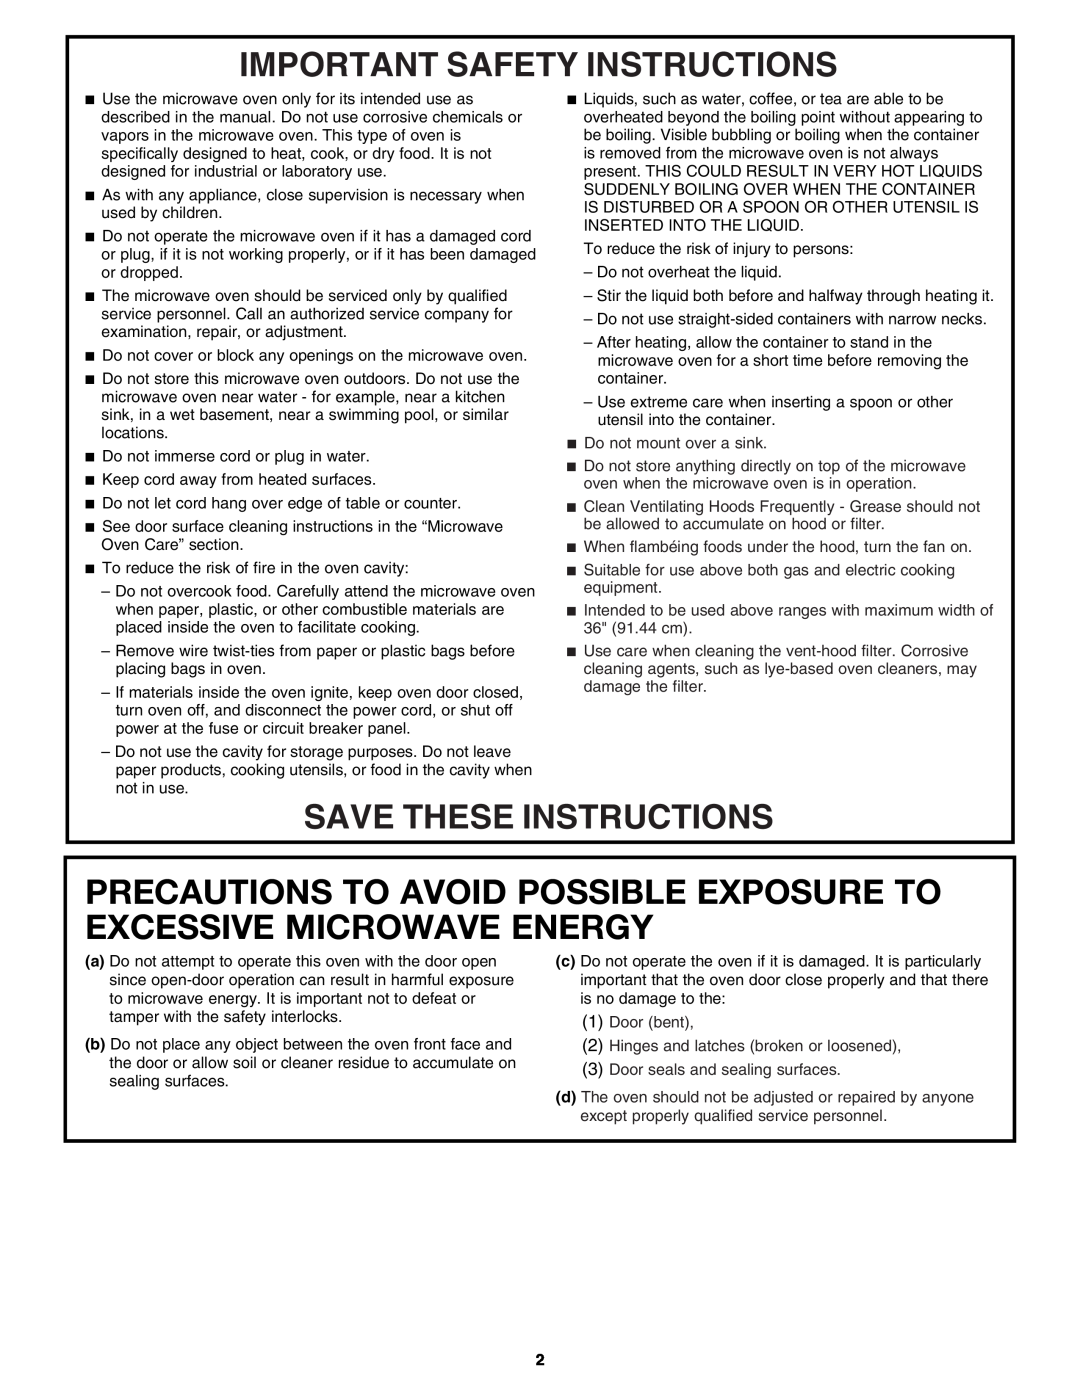 Whirlpool W10545080A Precautions To Avoid Possible Exposure To Excessive Microwave Energy, Important Safety Instructions 